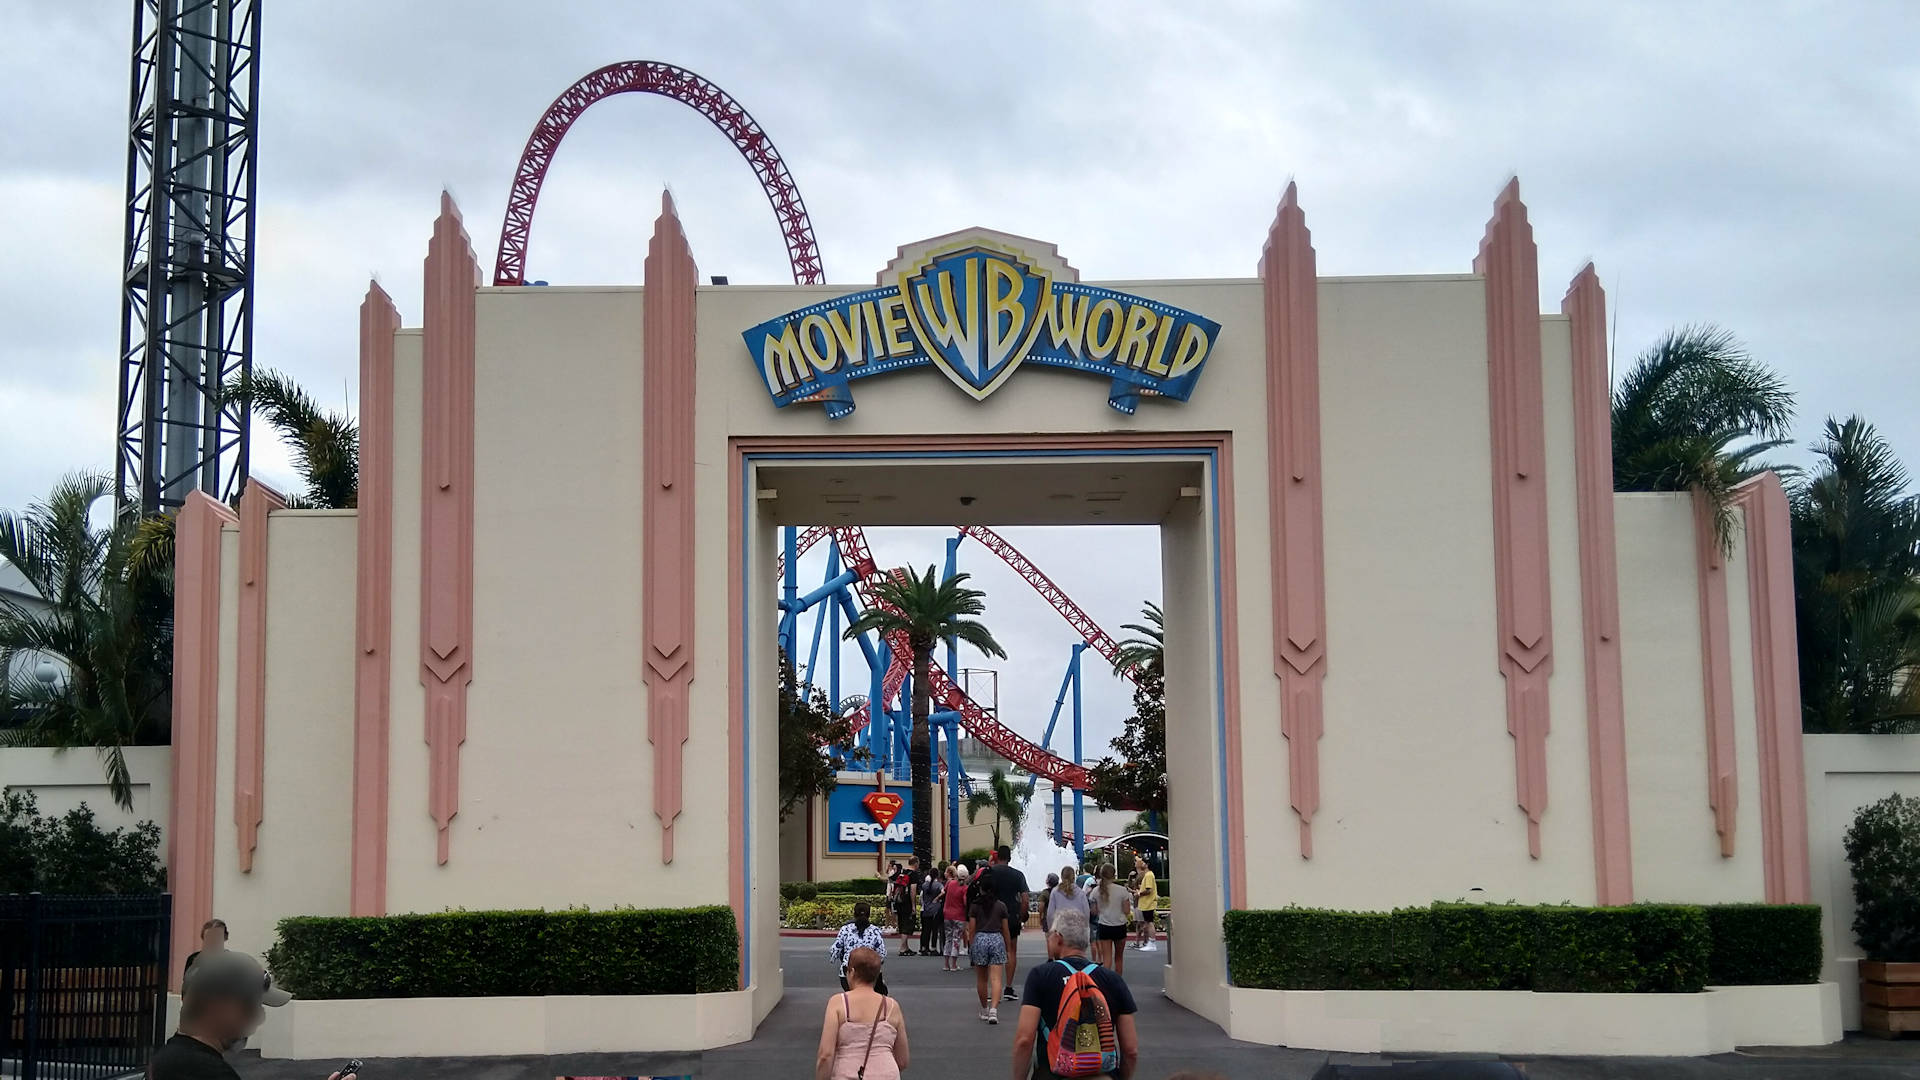 Entrance to Warner Brothers Movie World on the Gold Coast Queensland